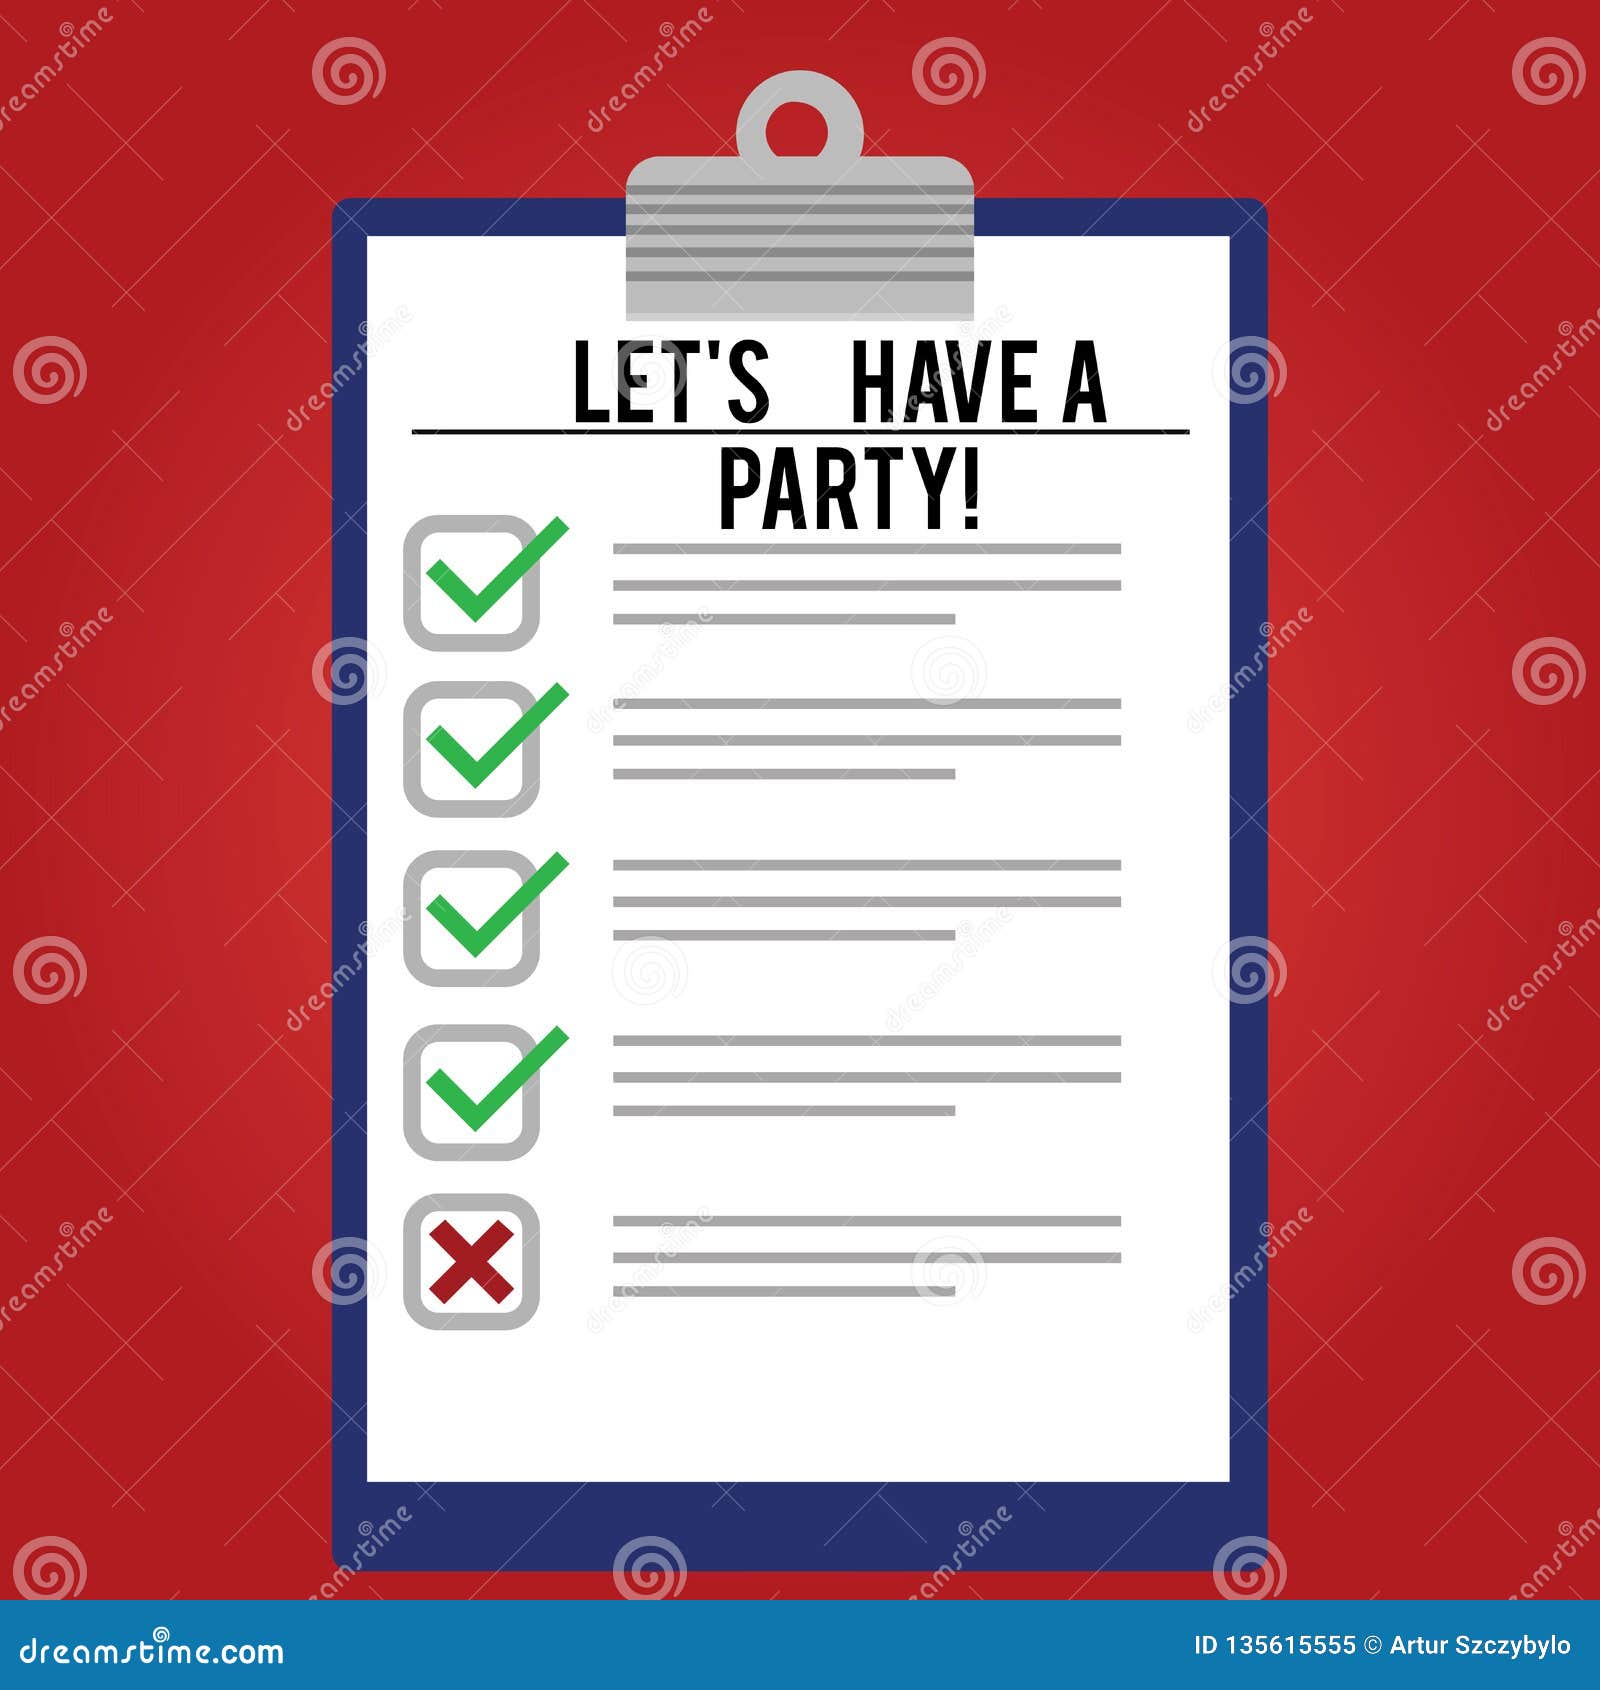 https://thumbs.dreamstime.com/z/handwriting-text-writing-let-s-have-party-concept-meaning-invitation-to-celebrate-relax-fun-celebration-lined-color-vertical-135615555.jpg